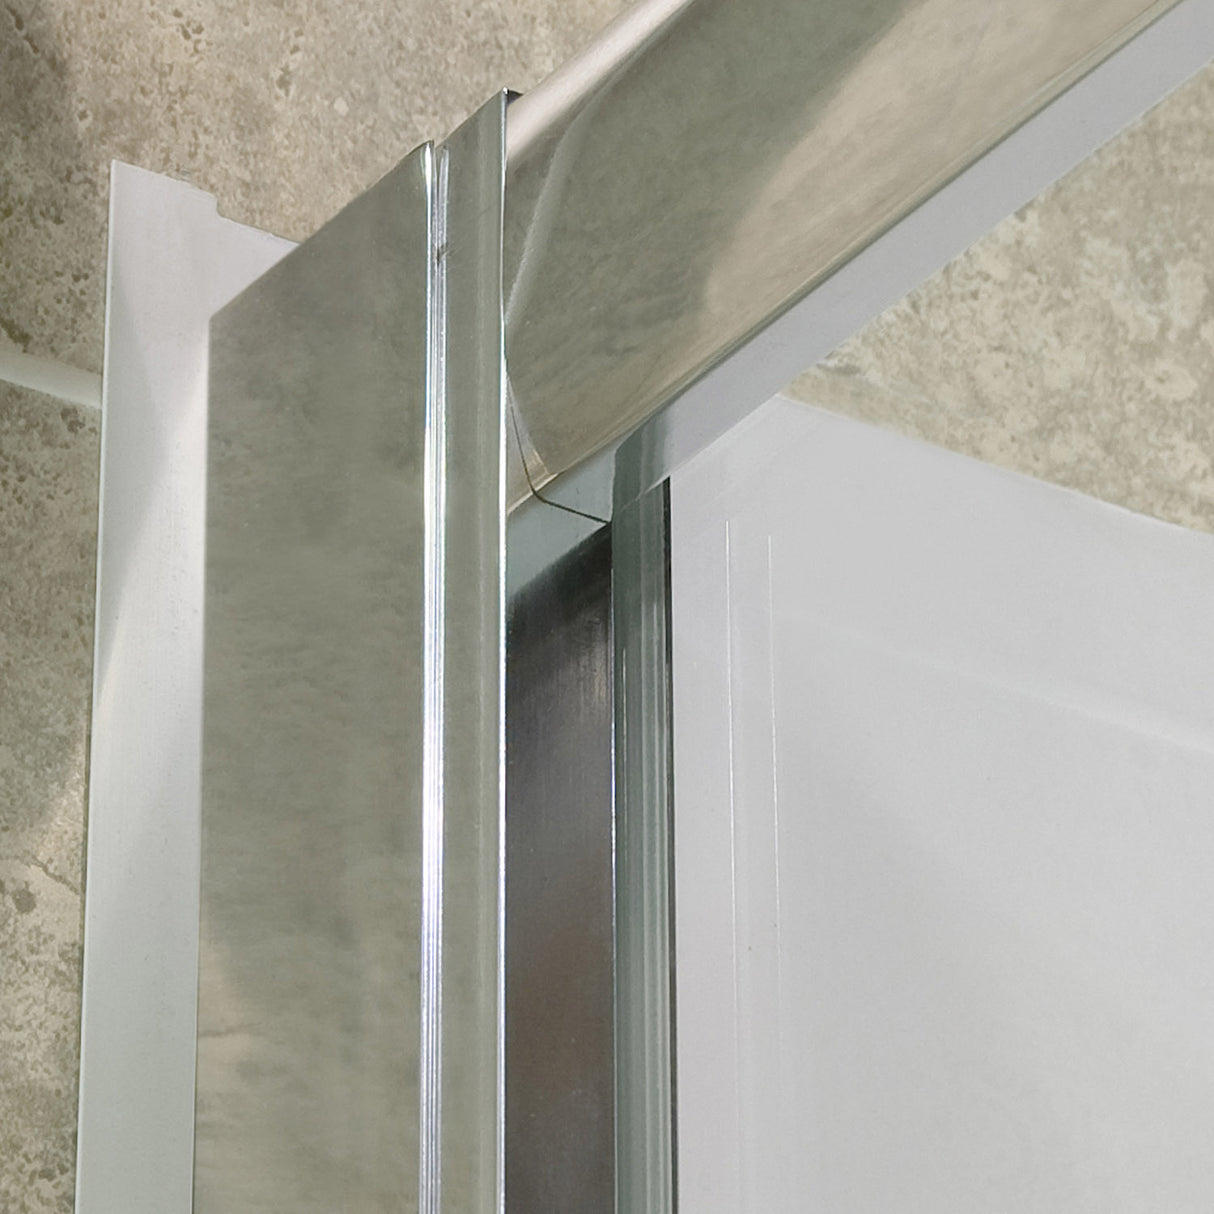 DreamLine Visions 34 in. D x 60 in. W x 74 3/4 in. H Sliding Shower Door in Chrome with Left Drain White Shower Base